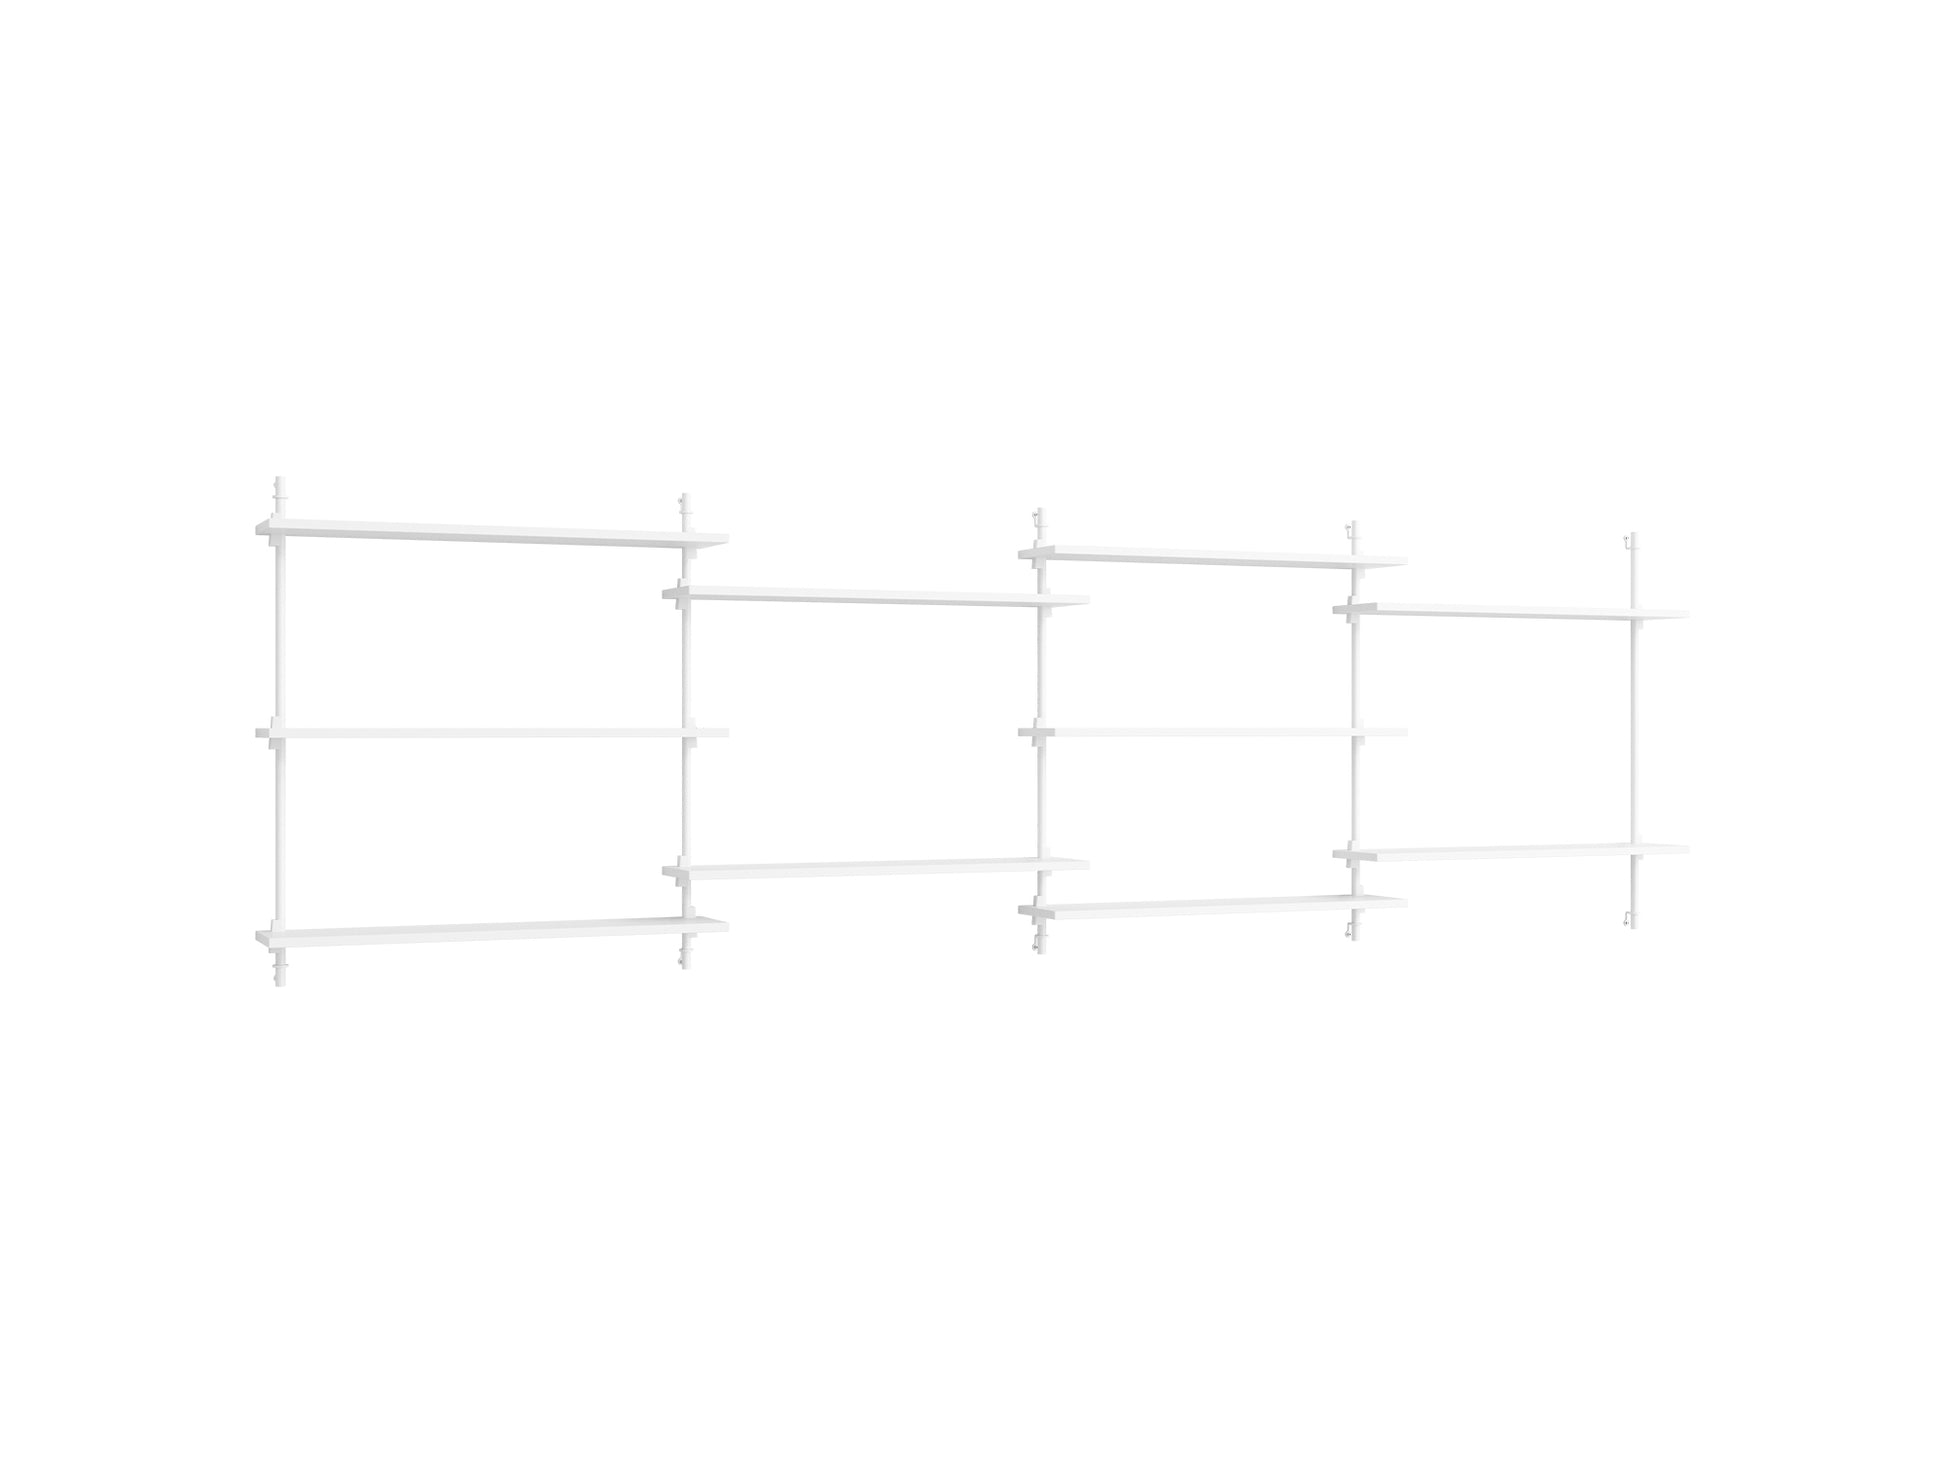 Wall Shelving System Sets (85 cm) by Moebe - WS.85.4 / White Uprights / White Painted Oak